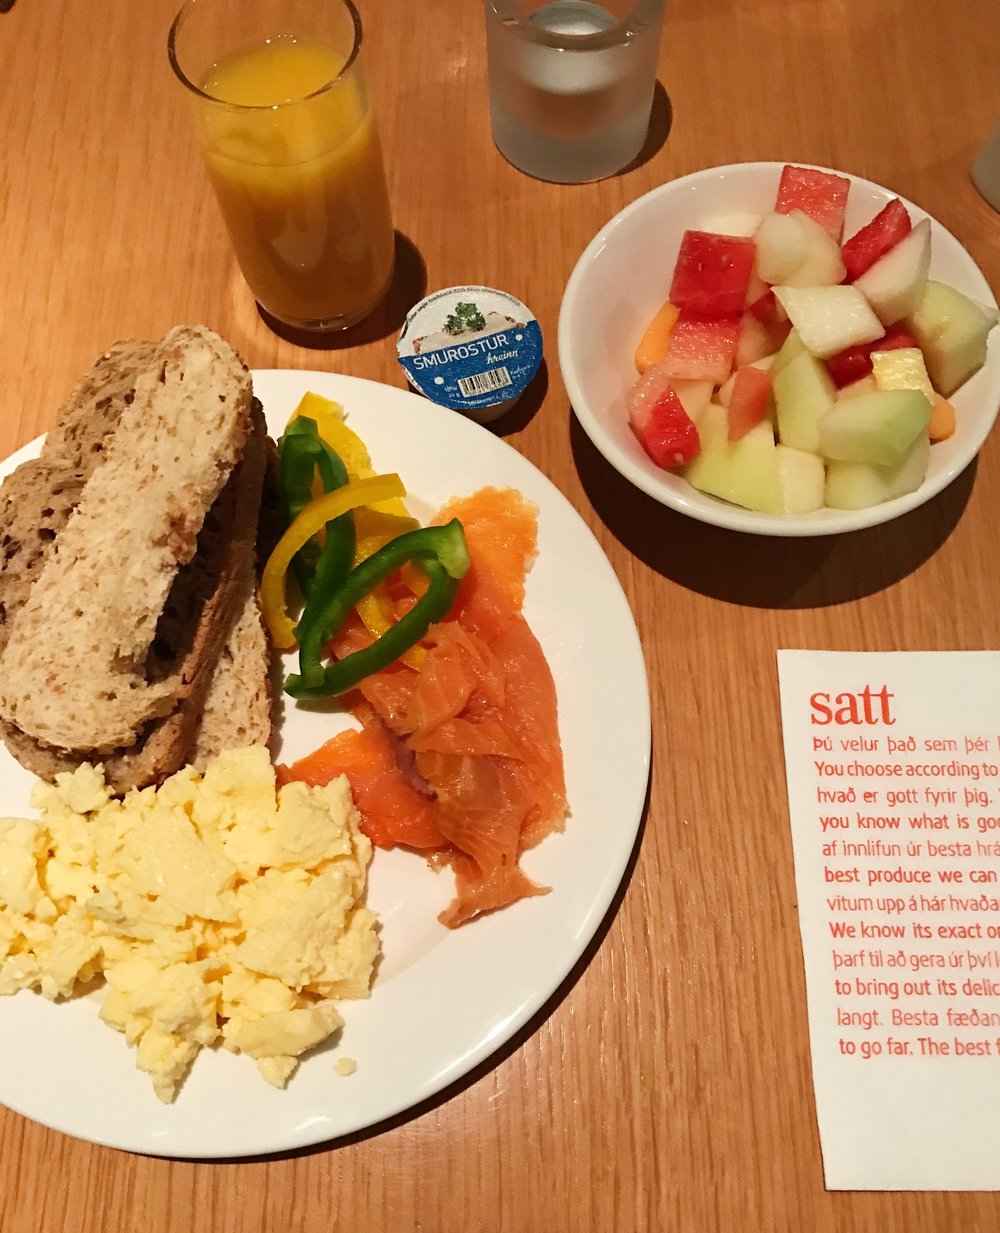 Pictured: Buffet Breakfast. &nbsp;Cost: ISK 3000 per person = about $26.00